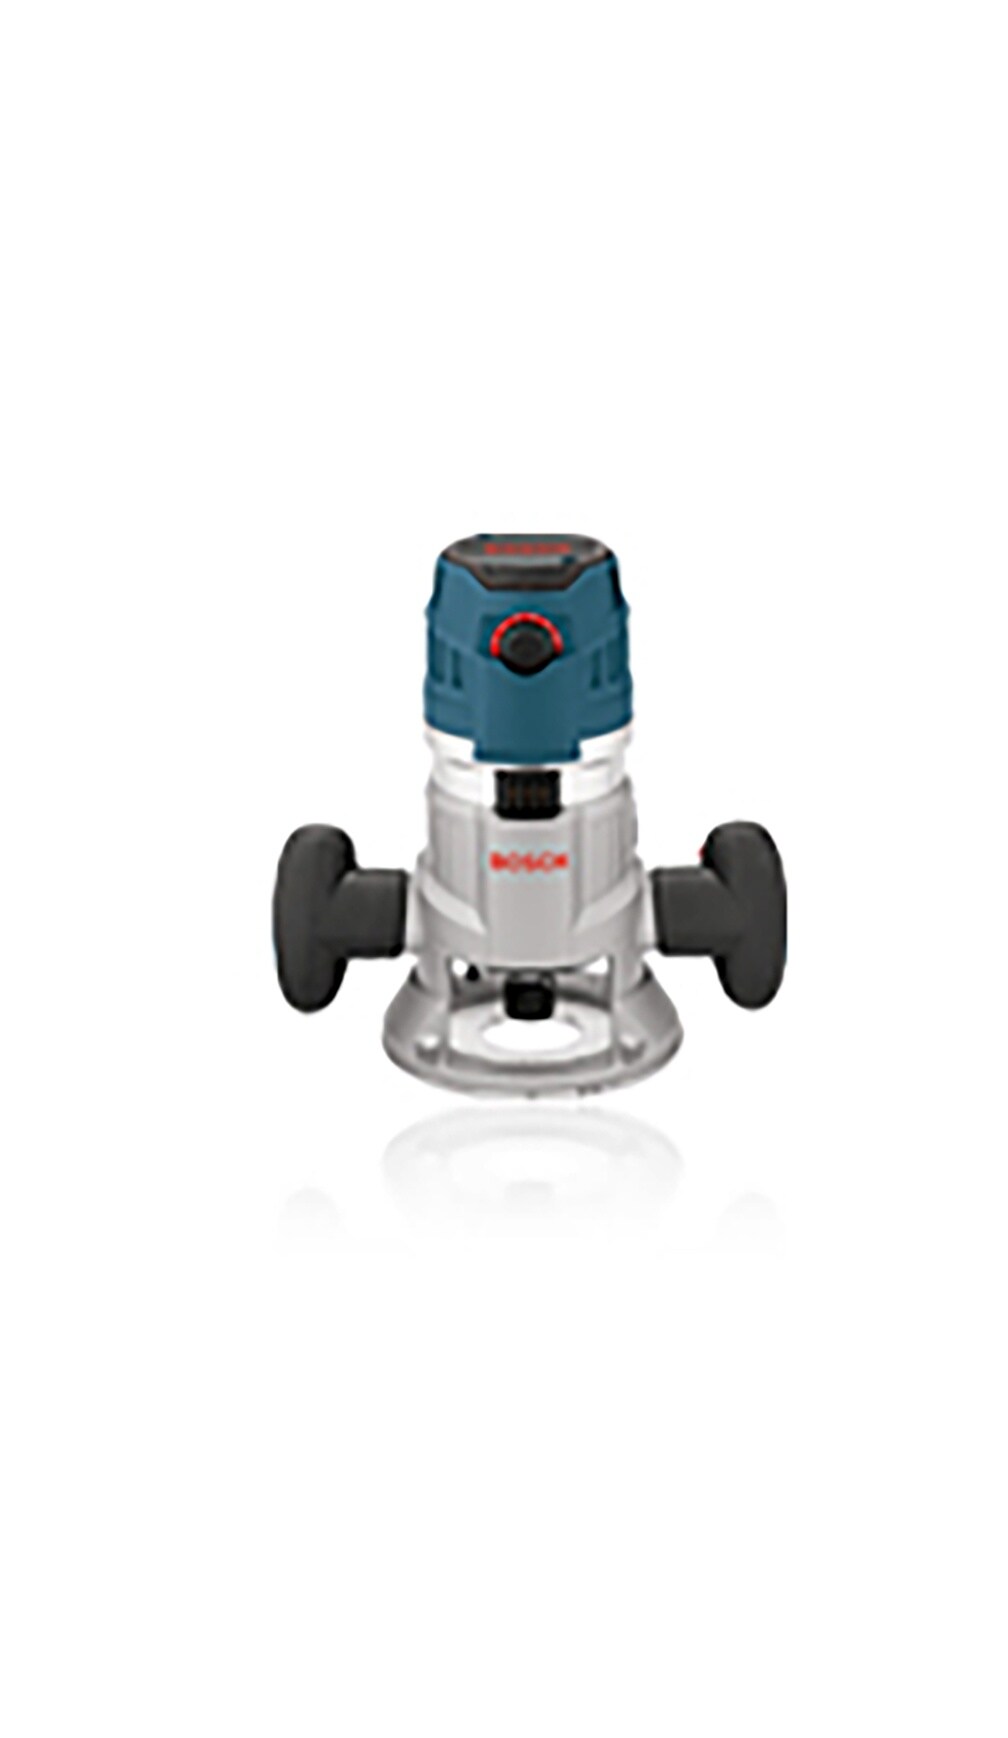 Bosch 1/4-in; 3/8-in; 1/2-in and 8mm 15-Amp 2.3-HP Variable Speed